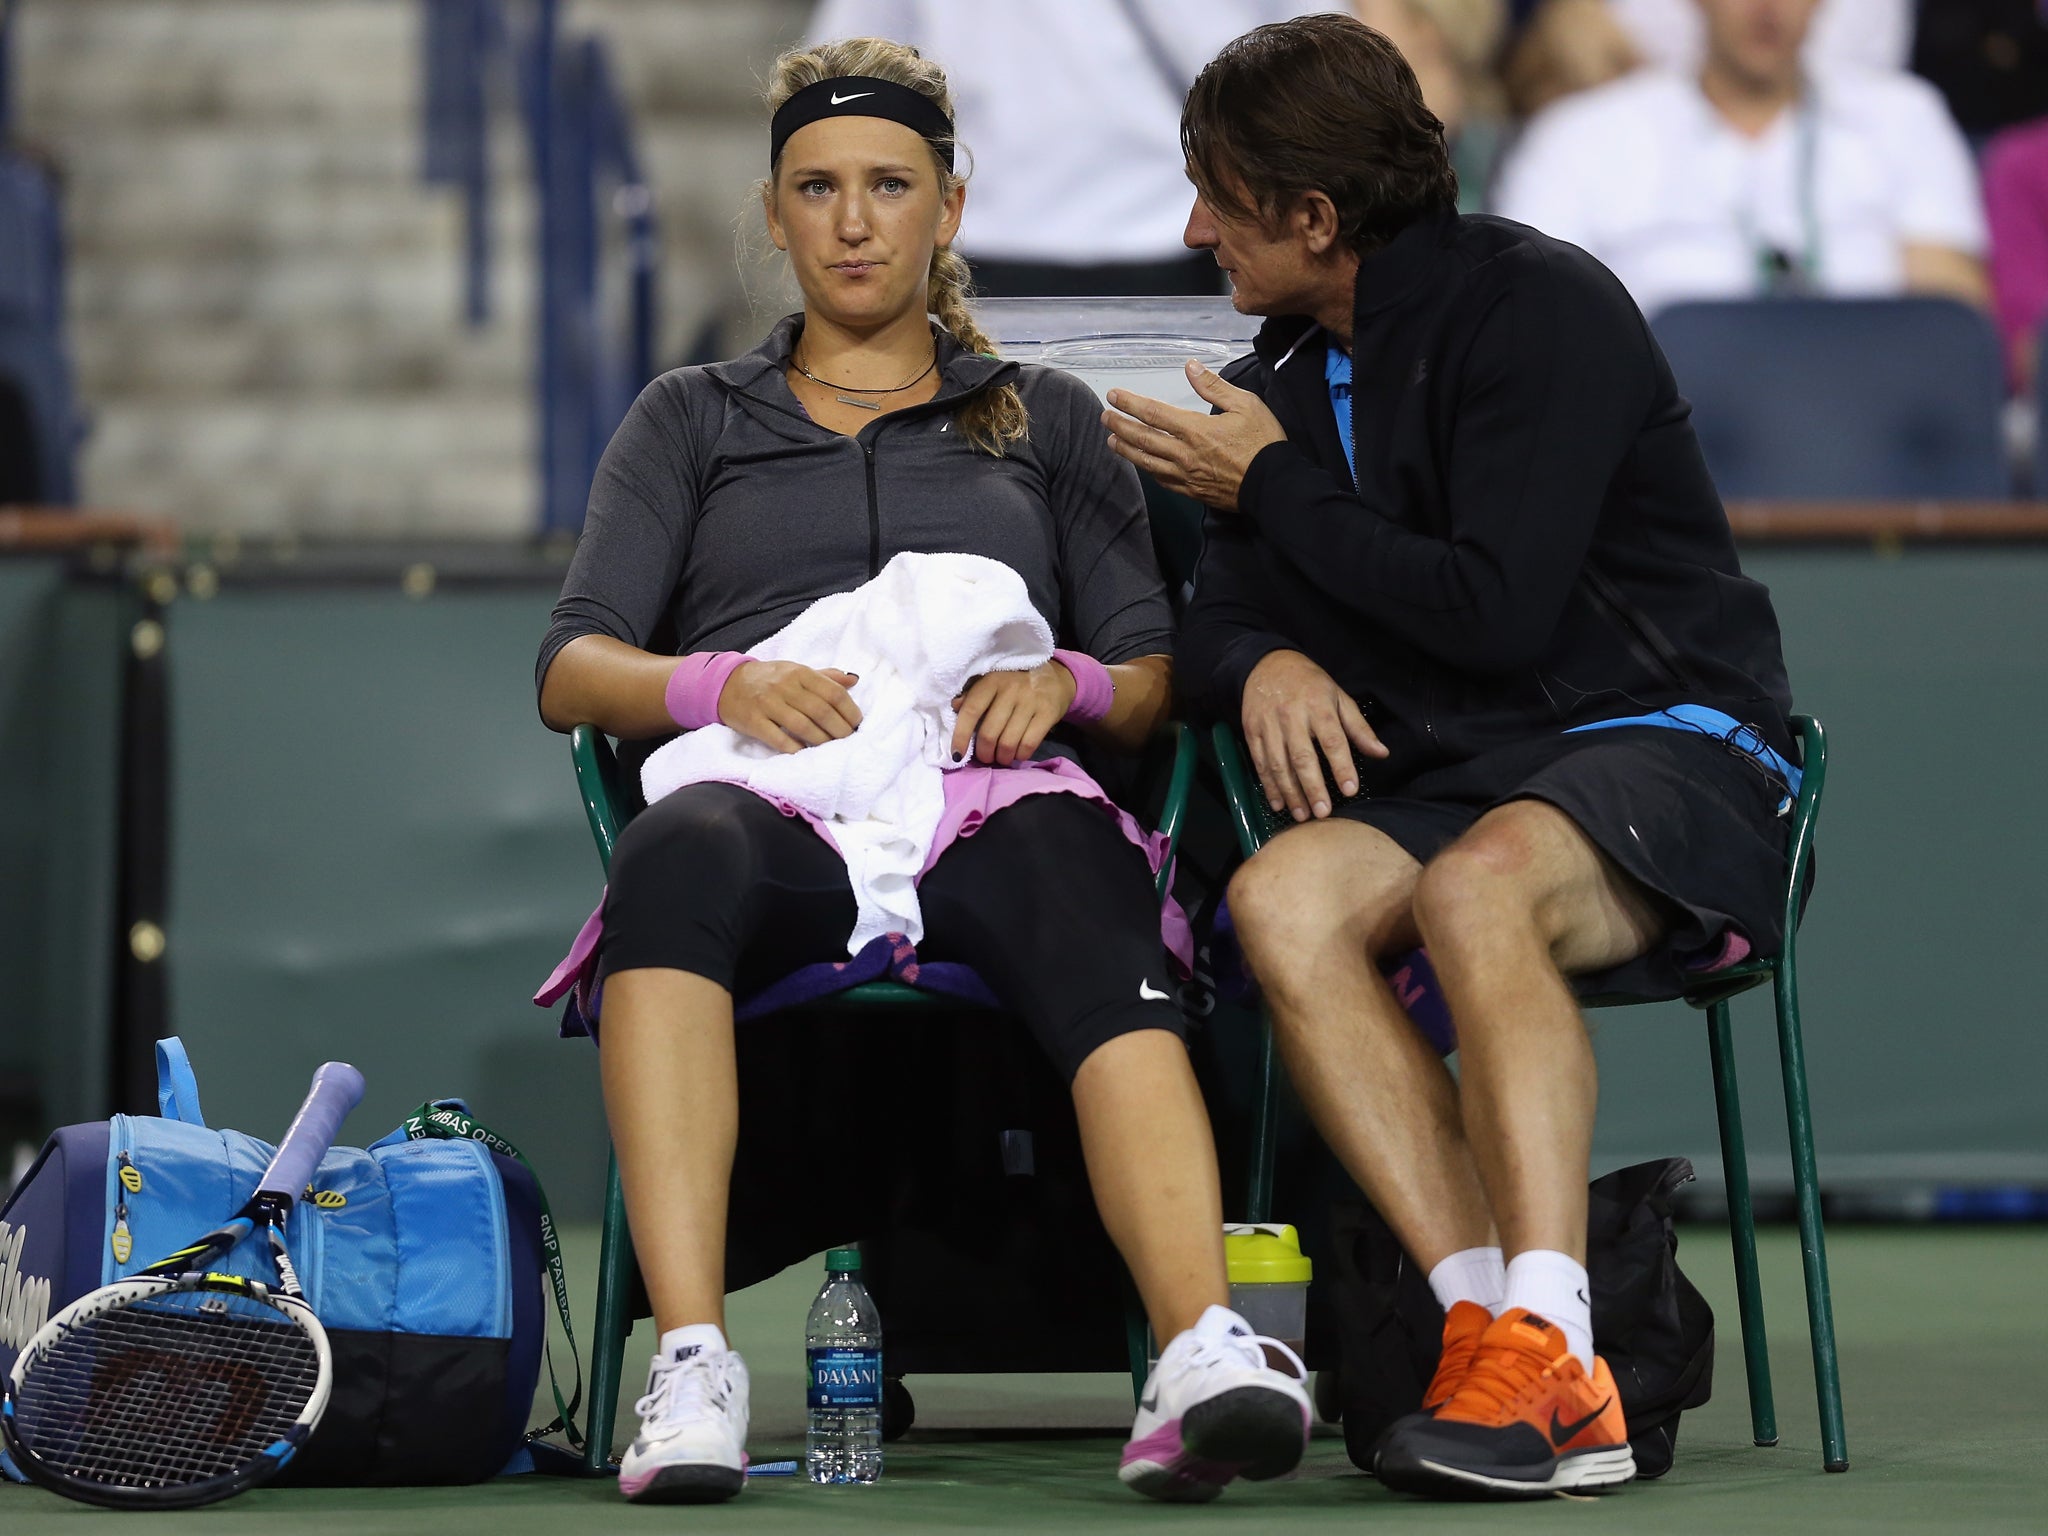 Victoria Azarenka was forced to pull out of the BNP Paribas Open at Indian Wells